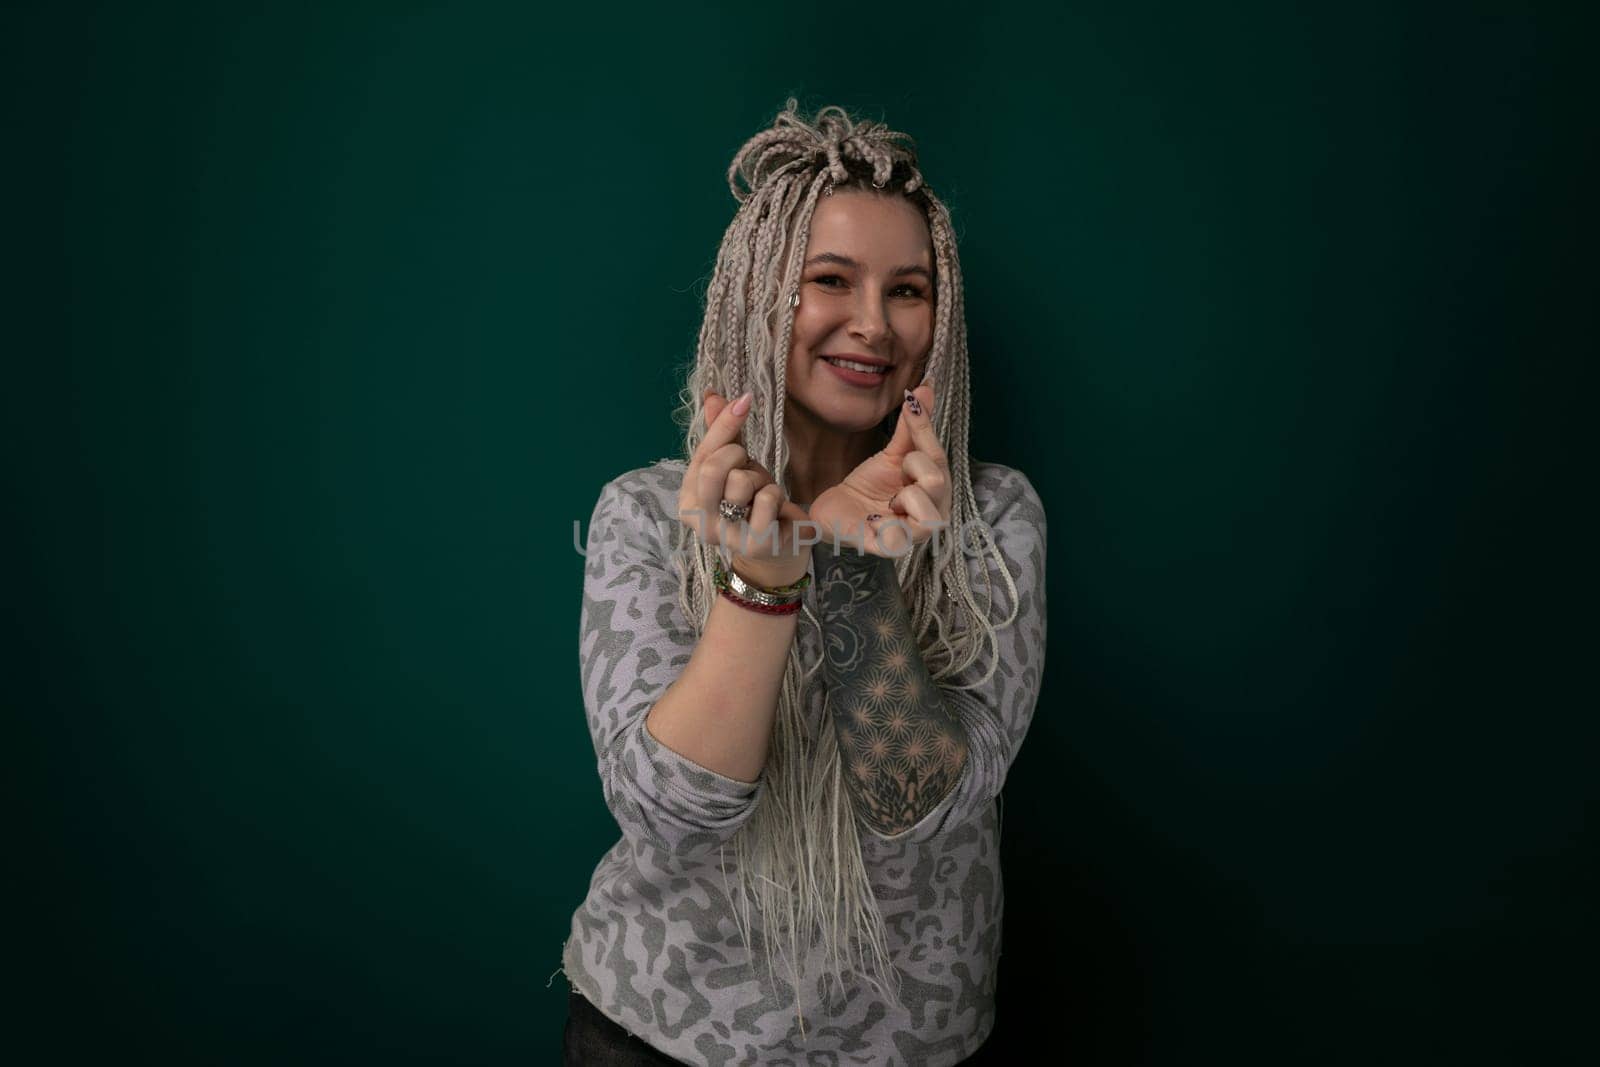 A woman with dreadlocks standing confidently in front of a vibrant green background. She exudes a sense of strength and individuality through her unique hairstyle and posture.